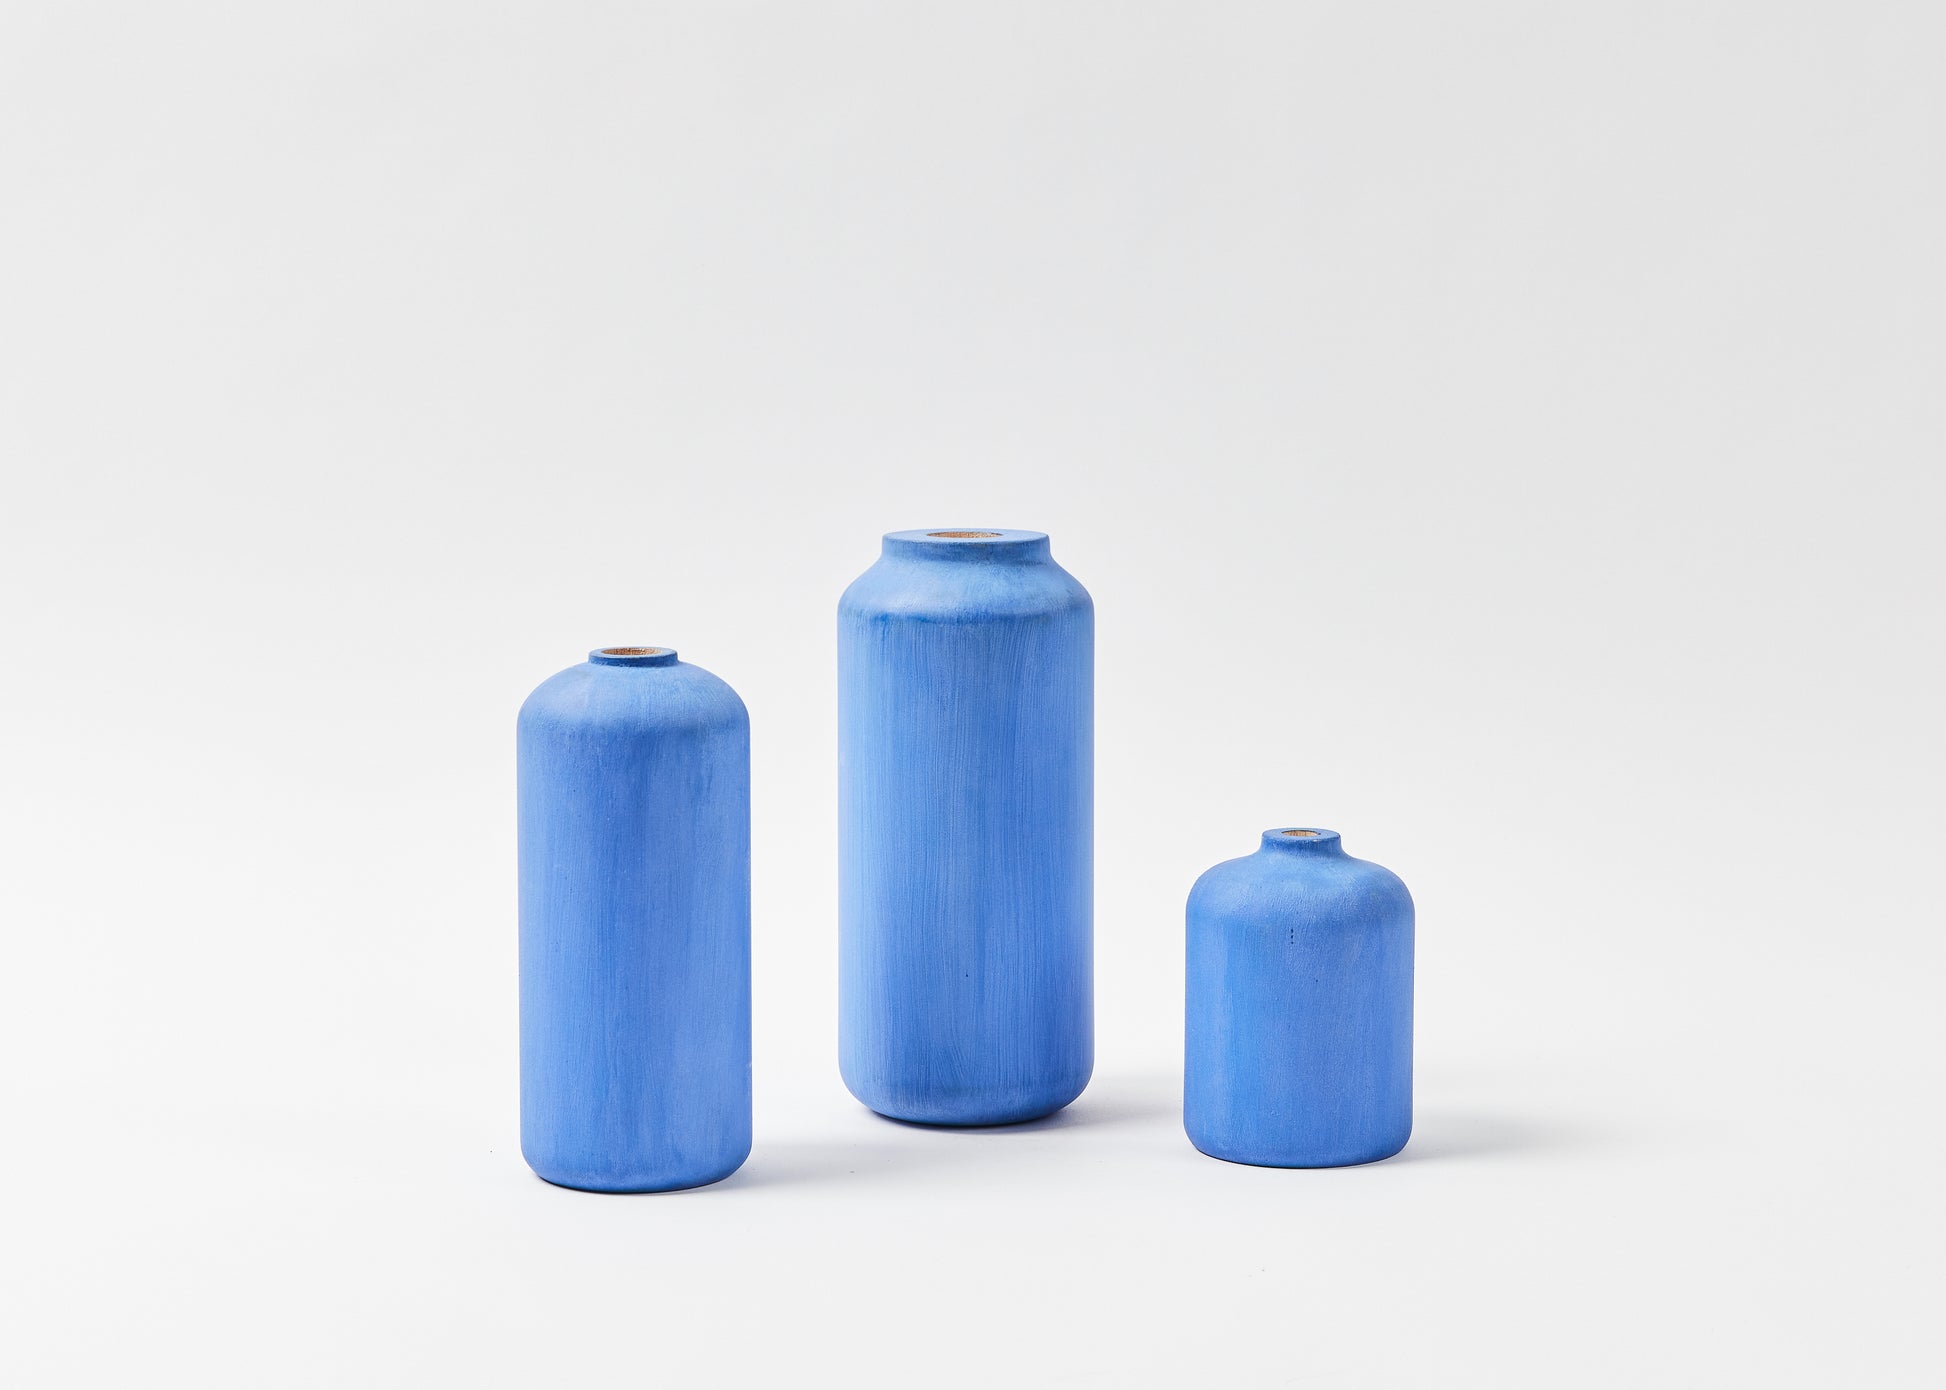 Josef Painted Vase | Cobalt Blue. Tall, Tall & Wide, and bud vases shown. By Melanie Abrantes Designs